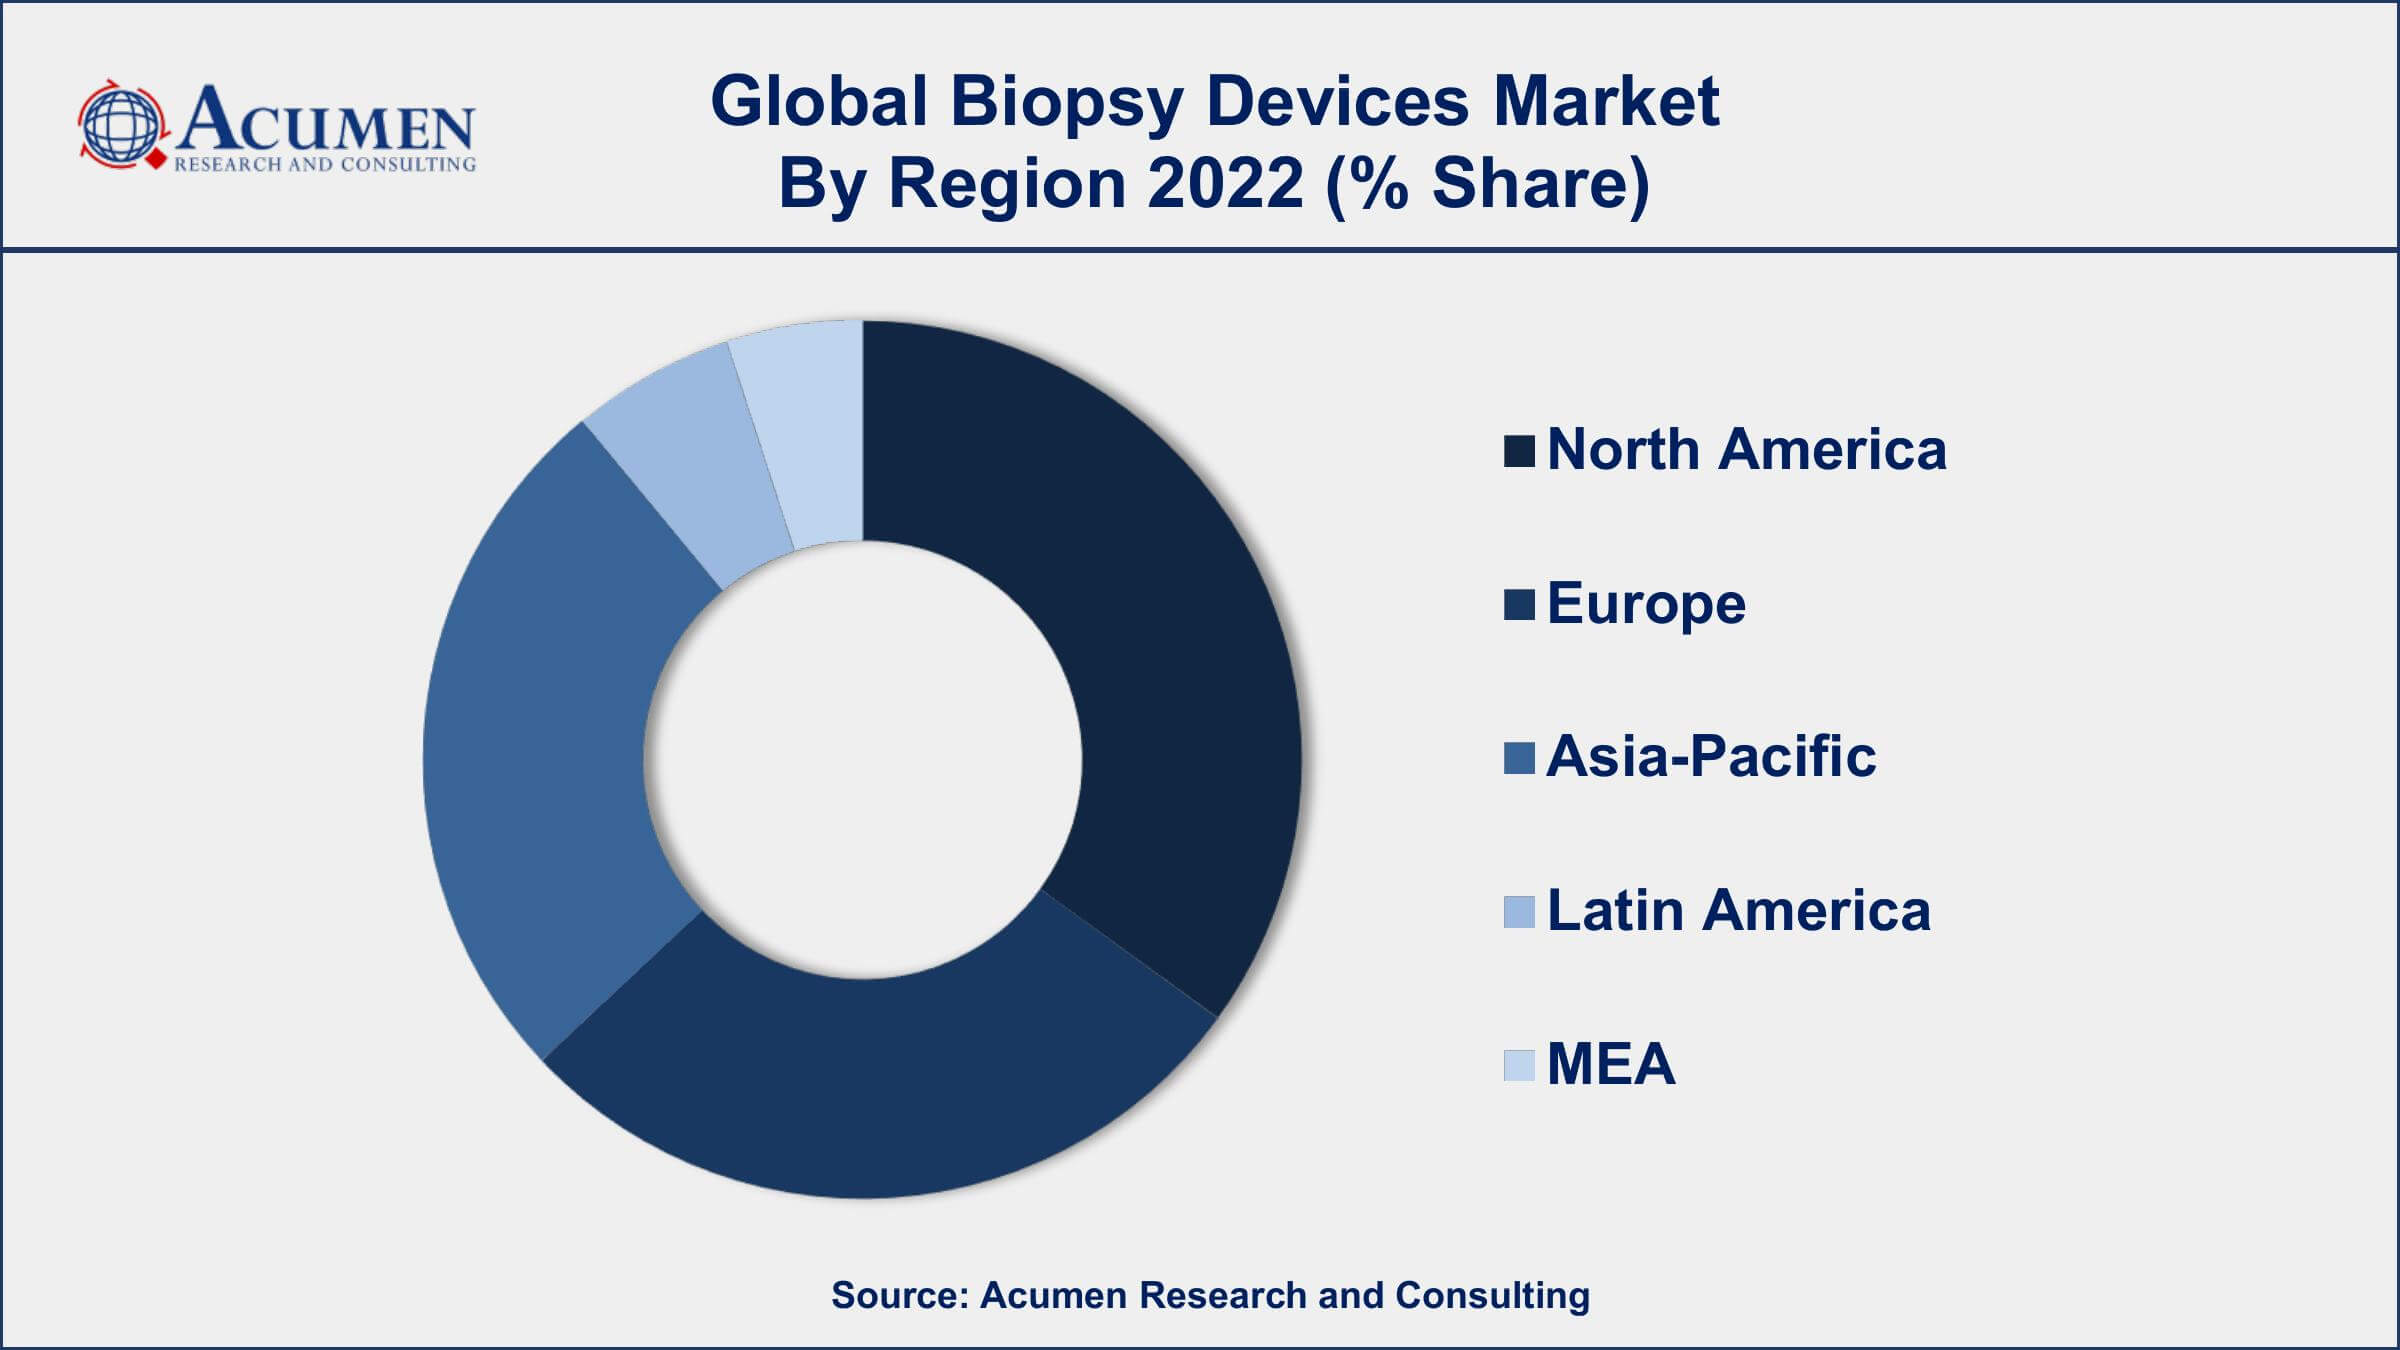 Biopsy Devices Market Drivers